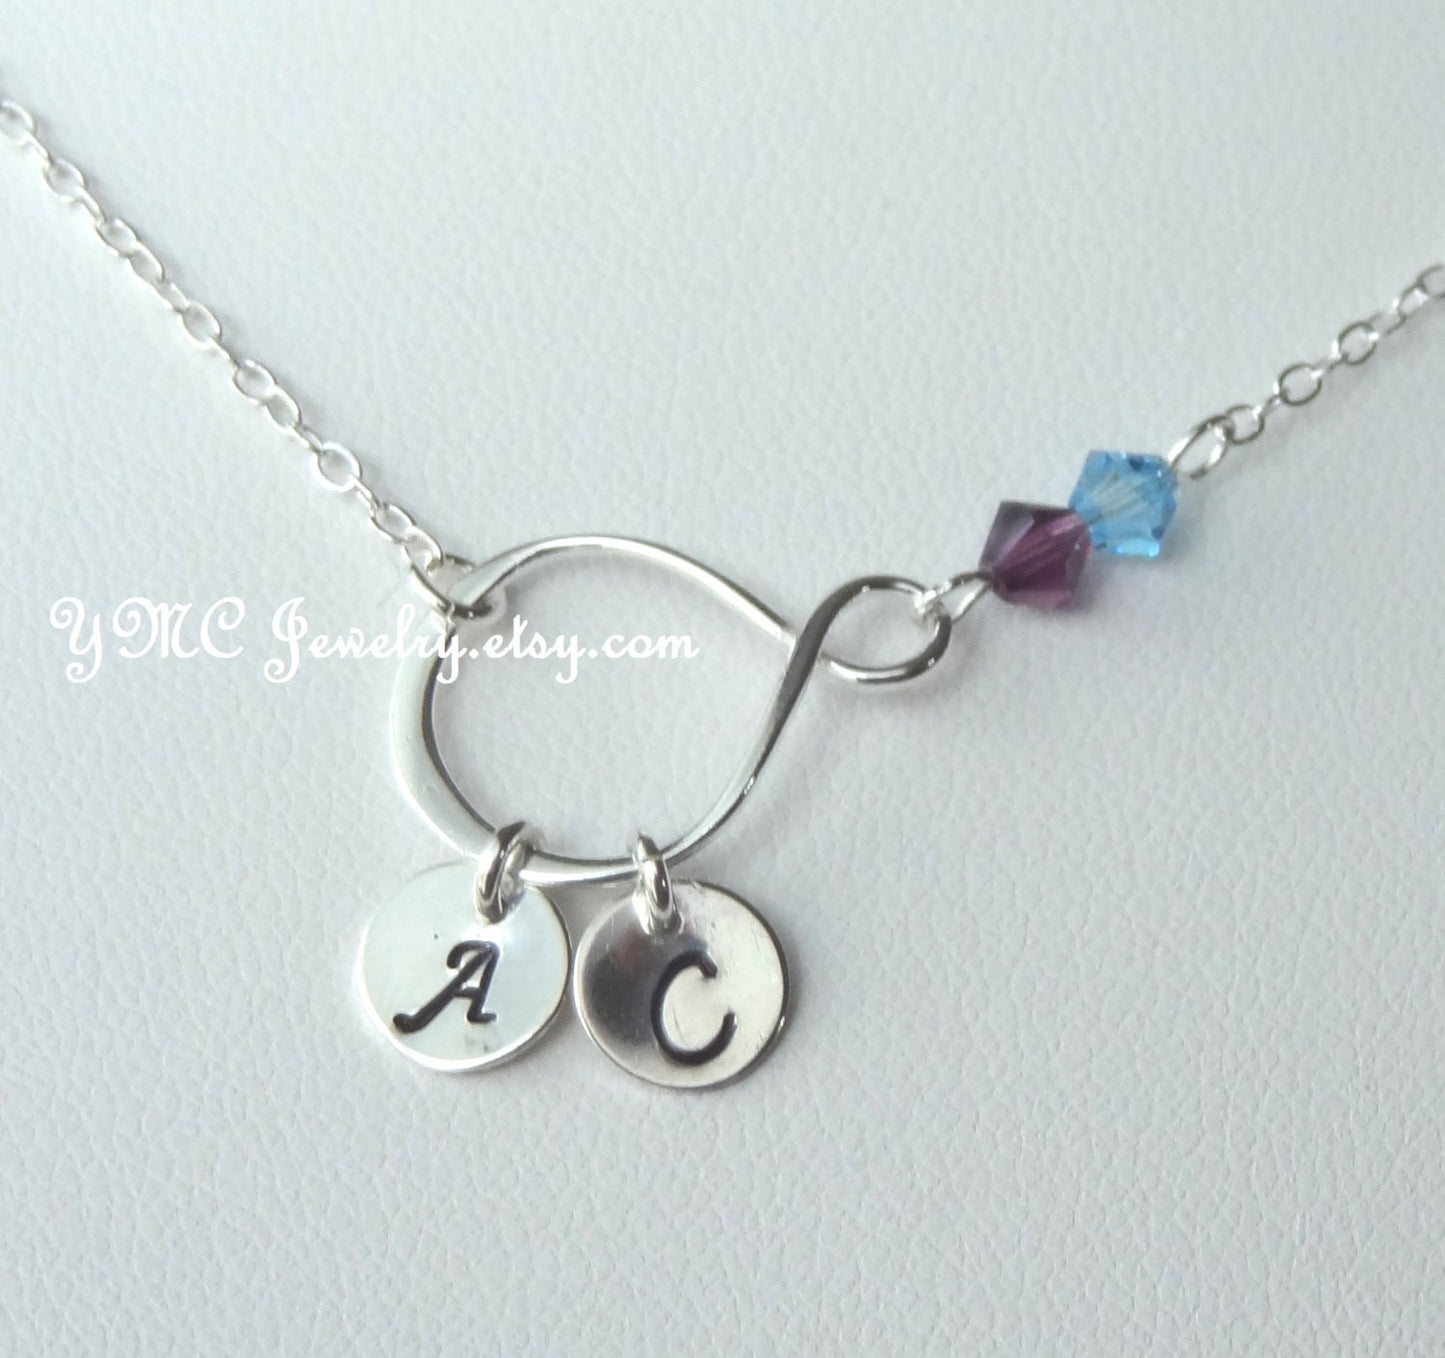 Sterling Silver Infinity Necklace,Initial, Birthstone Necklace,Family Necklace,Family Birthstone Infinity Necklace,Infinity Necklace,Grandma